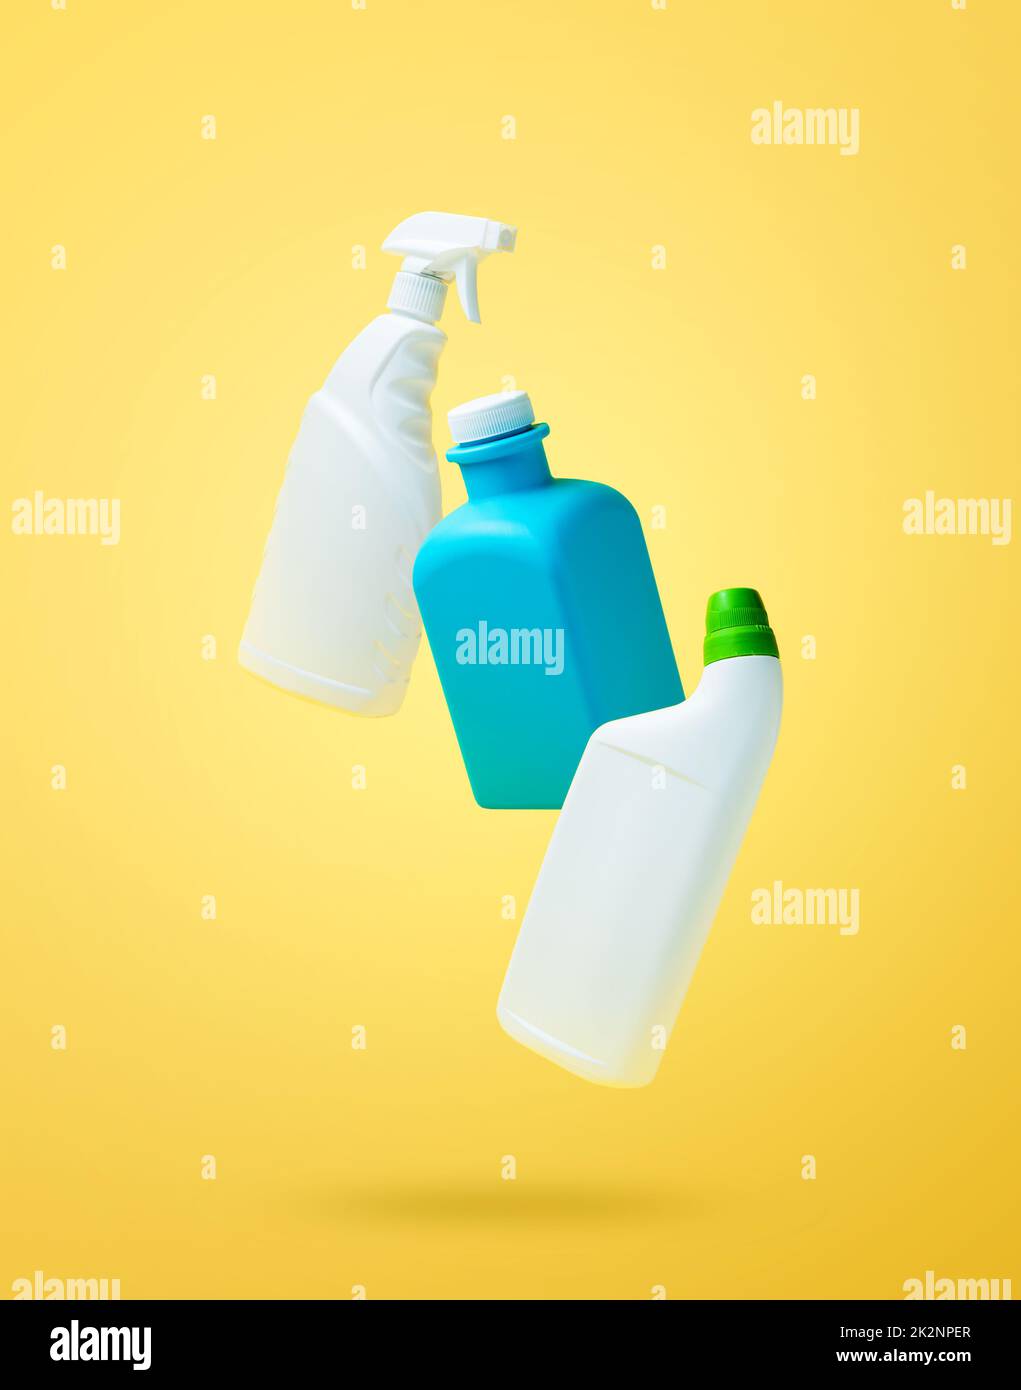 Falling in air blank household chemical bottles for cleaning the house Stock Photo